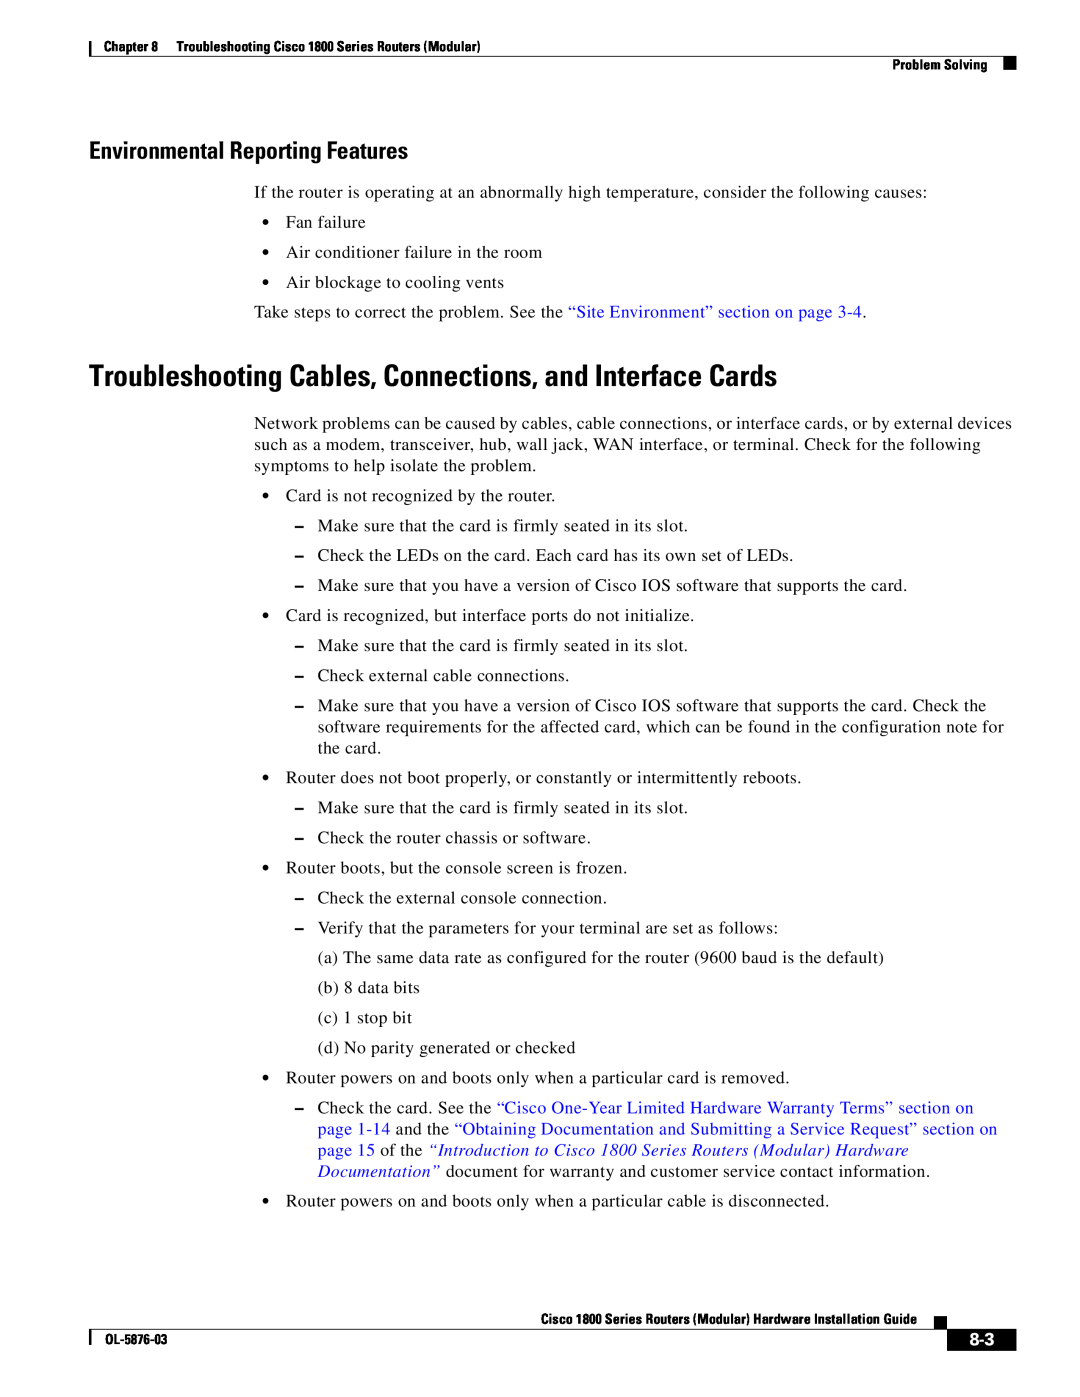 Cisco Systems CISCO1841-HSEC/K9-RF manual Troubleshooting Cables, Connections, and Interface Cards 